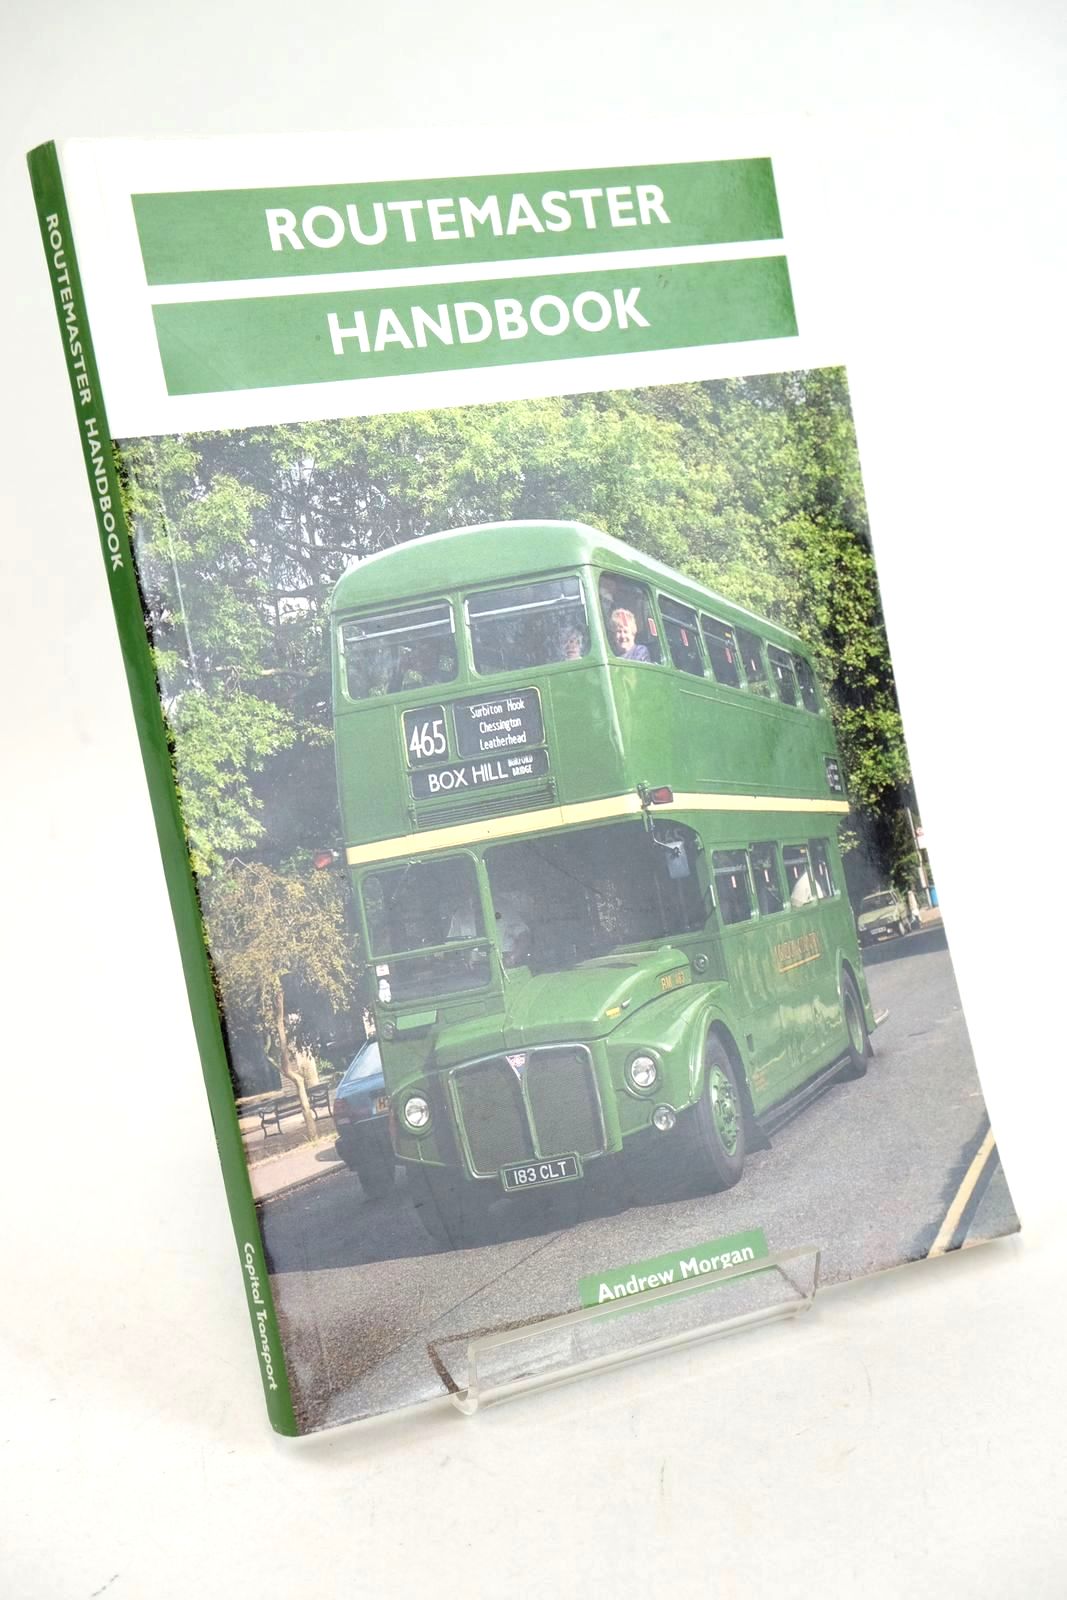 Photo of ROUTEMASTER HANDBOOK written by Morgan, Andrew published by Capital Transport (STOCK CODE: 1326946)  for sale by Stella & Rose's Books